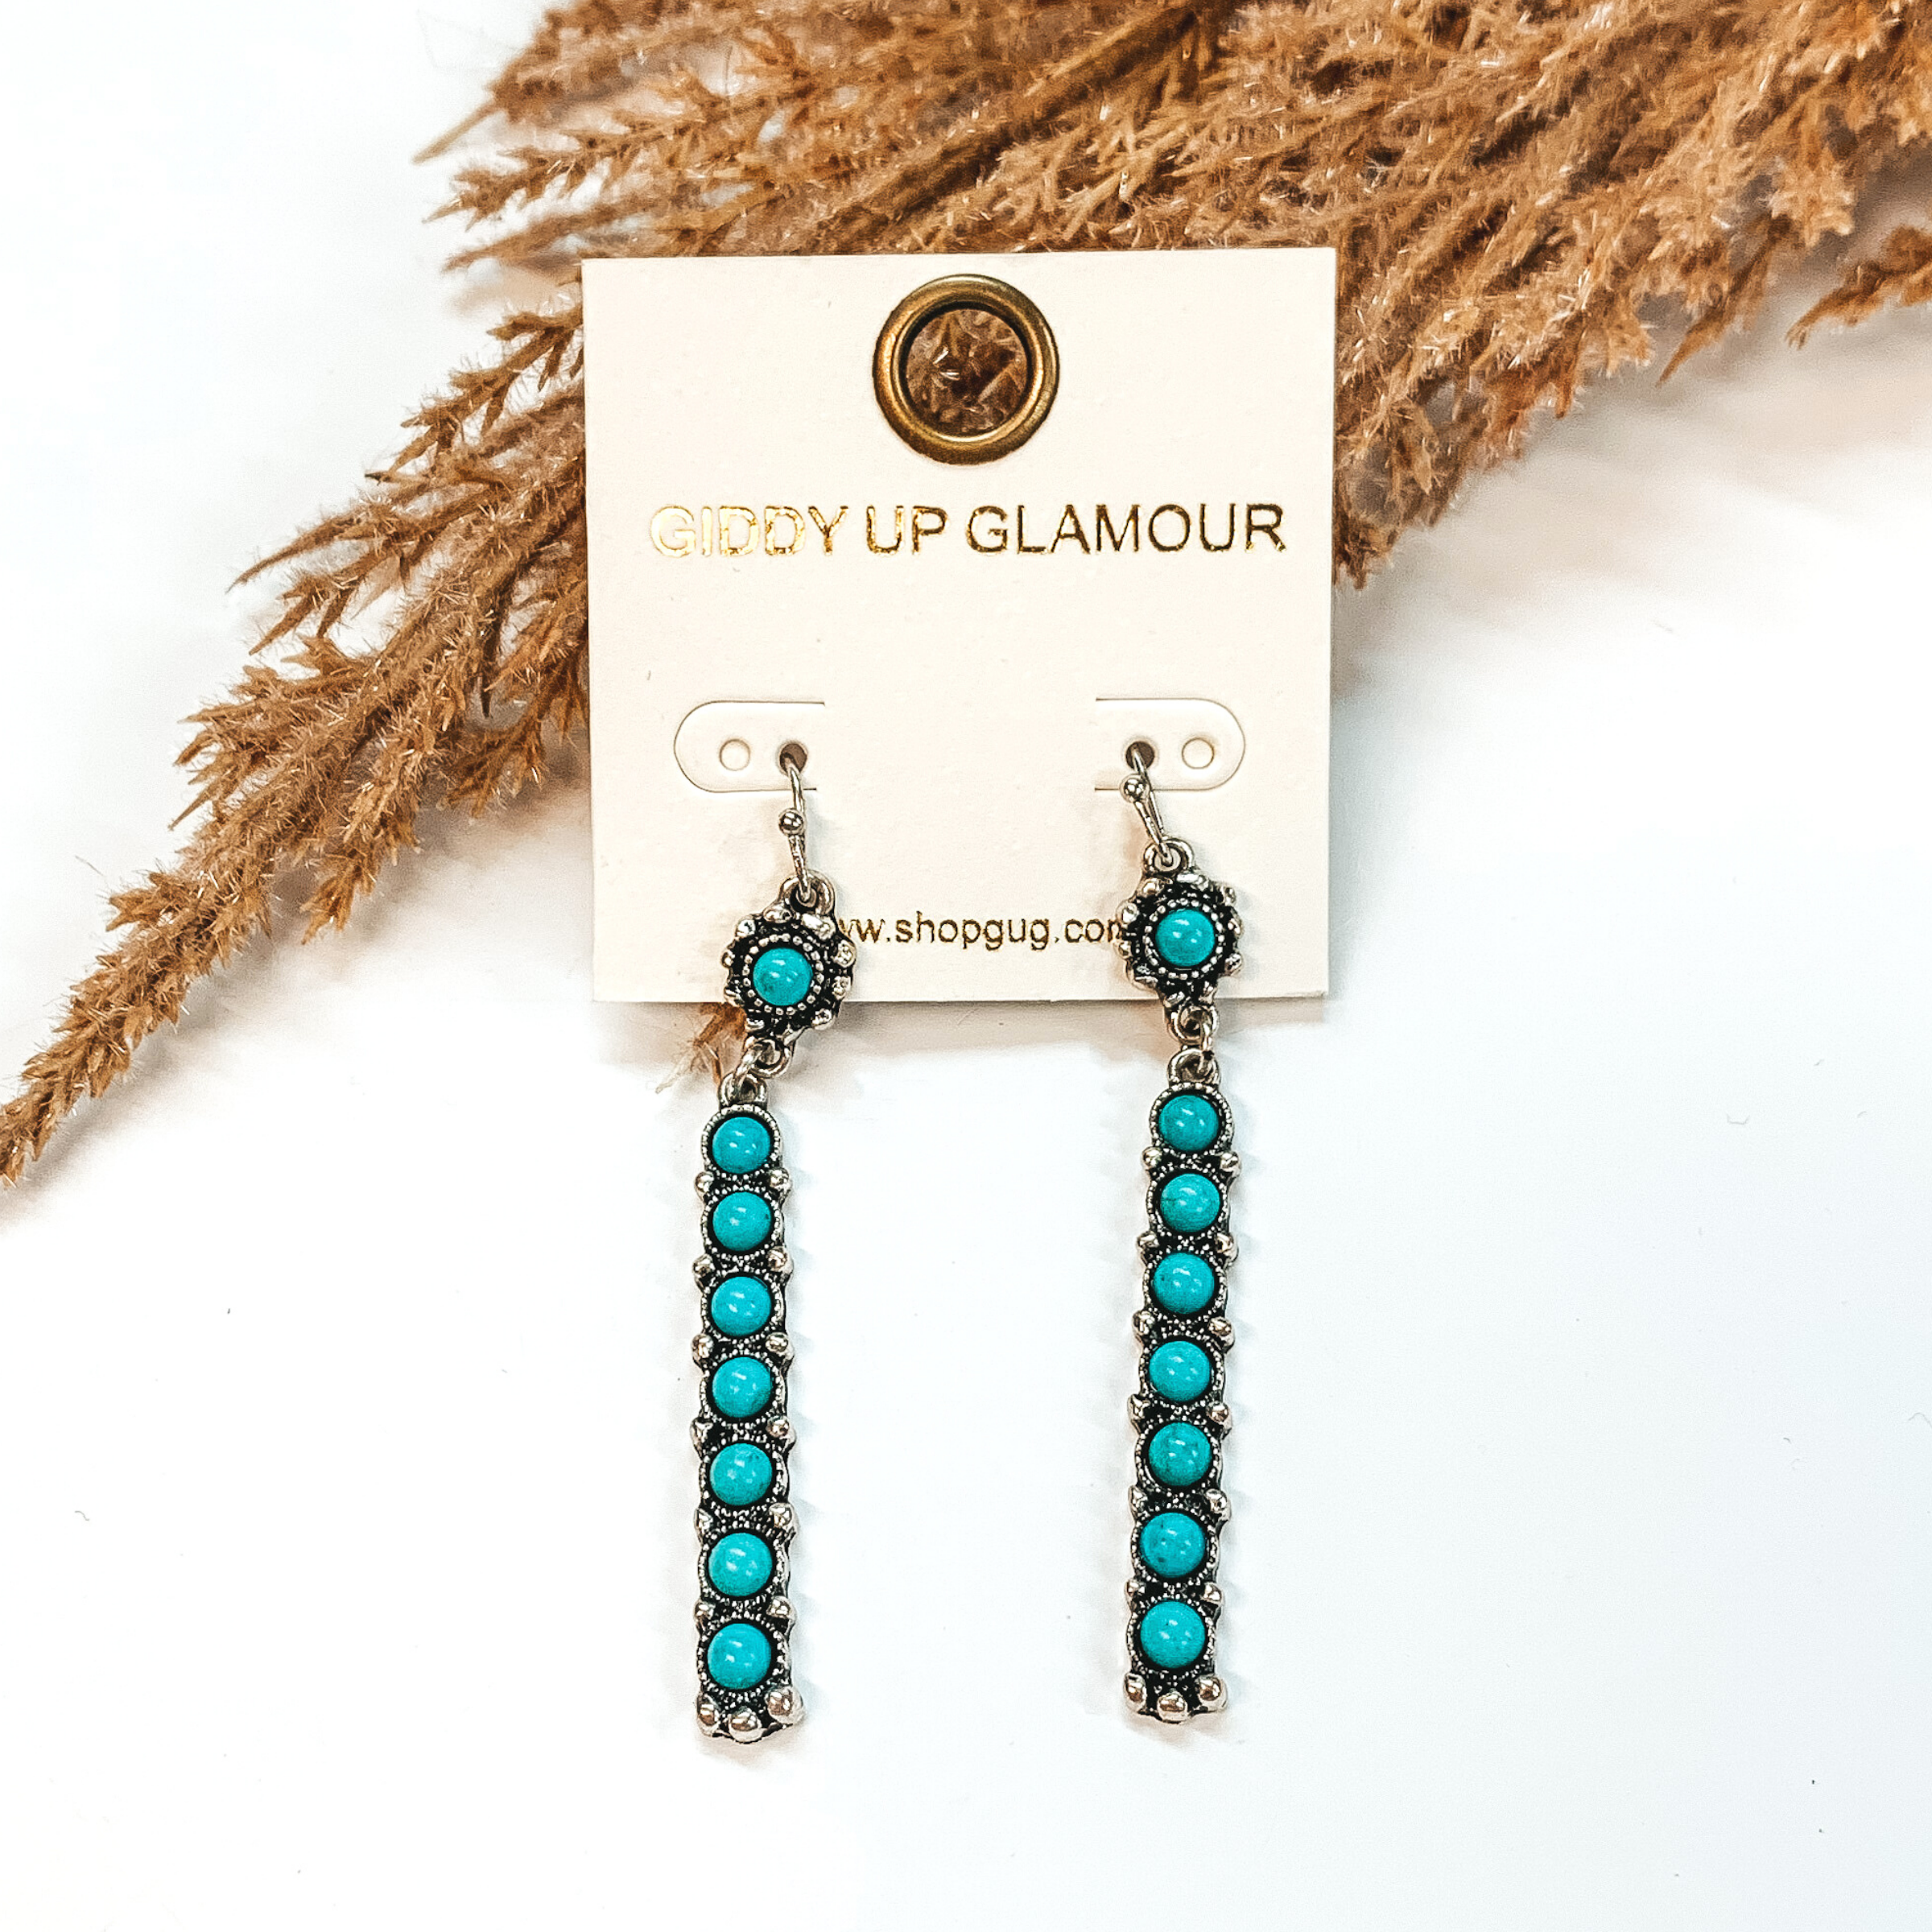 On silver fish hook earrings there is a small circle drop pendant with a turquoise stone. Hanging from the bottom is a rectangle bar that has an inlay of circle turquoise stones. These earrings are pictured on a white background in front of brown floral decor.